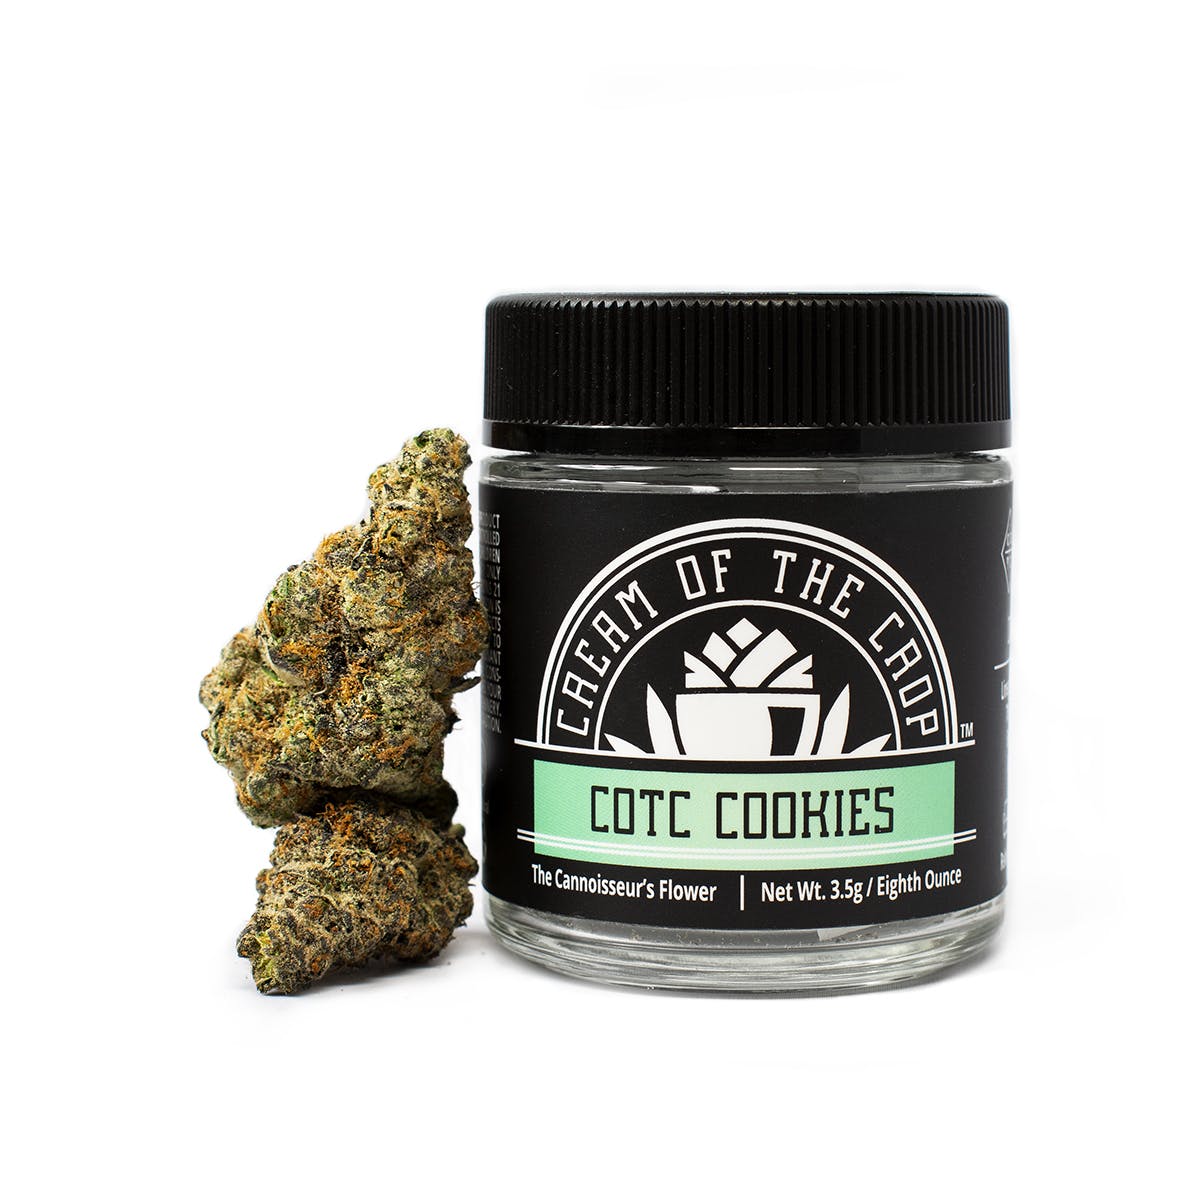 COTC Cookies by COTC